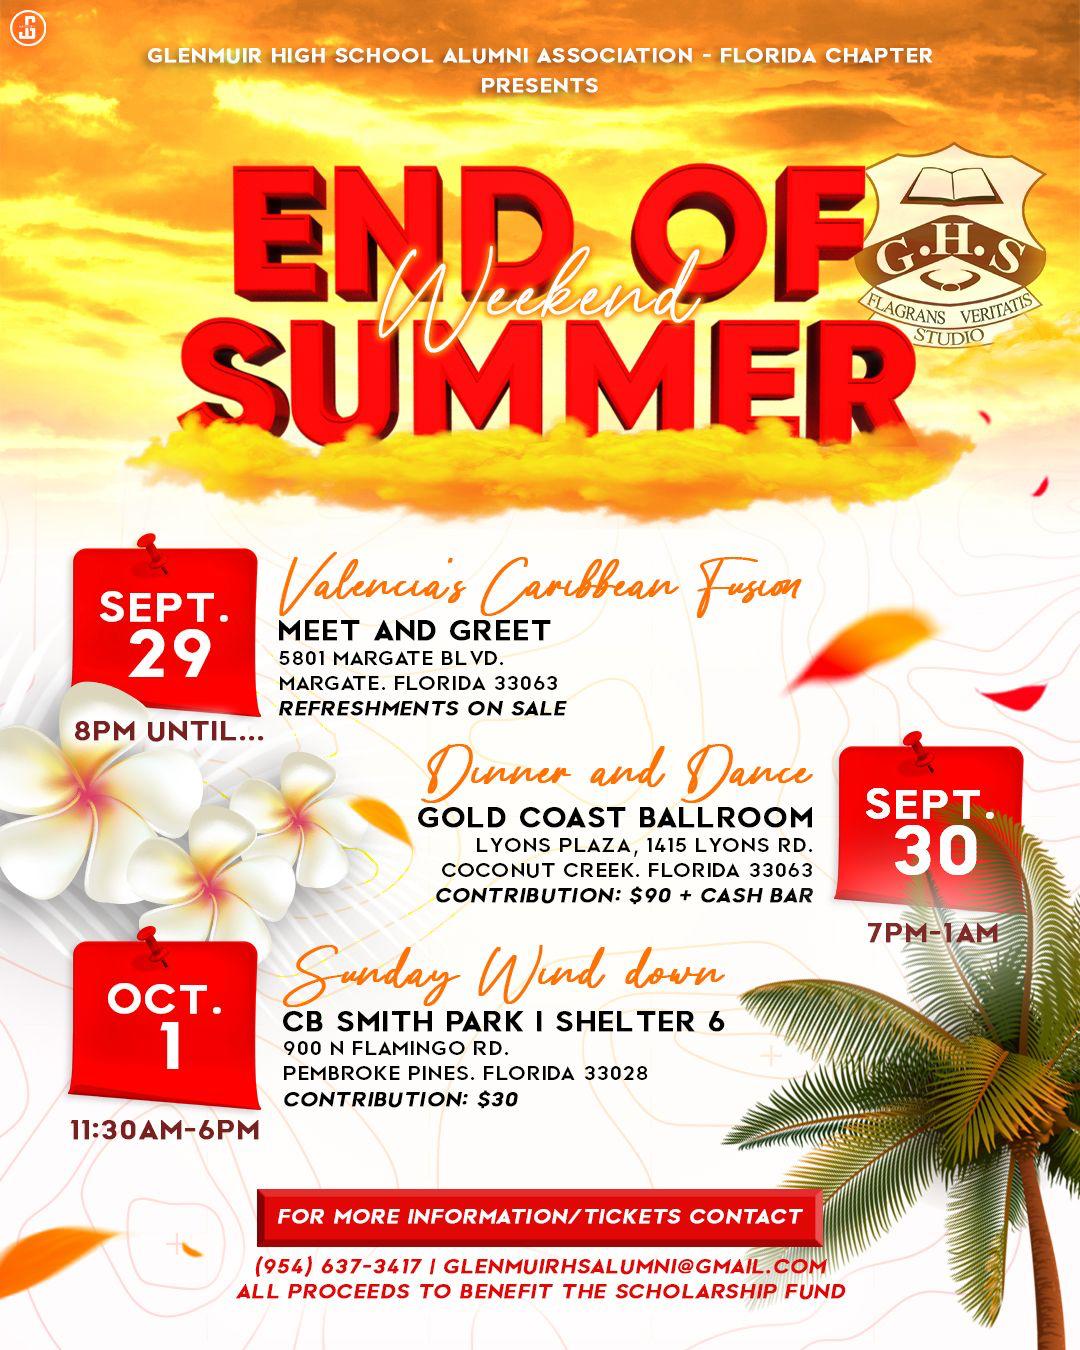 Florida Chapter - End of Summer Weekend